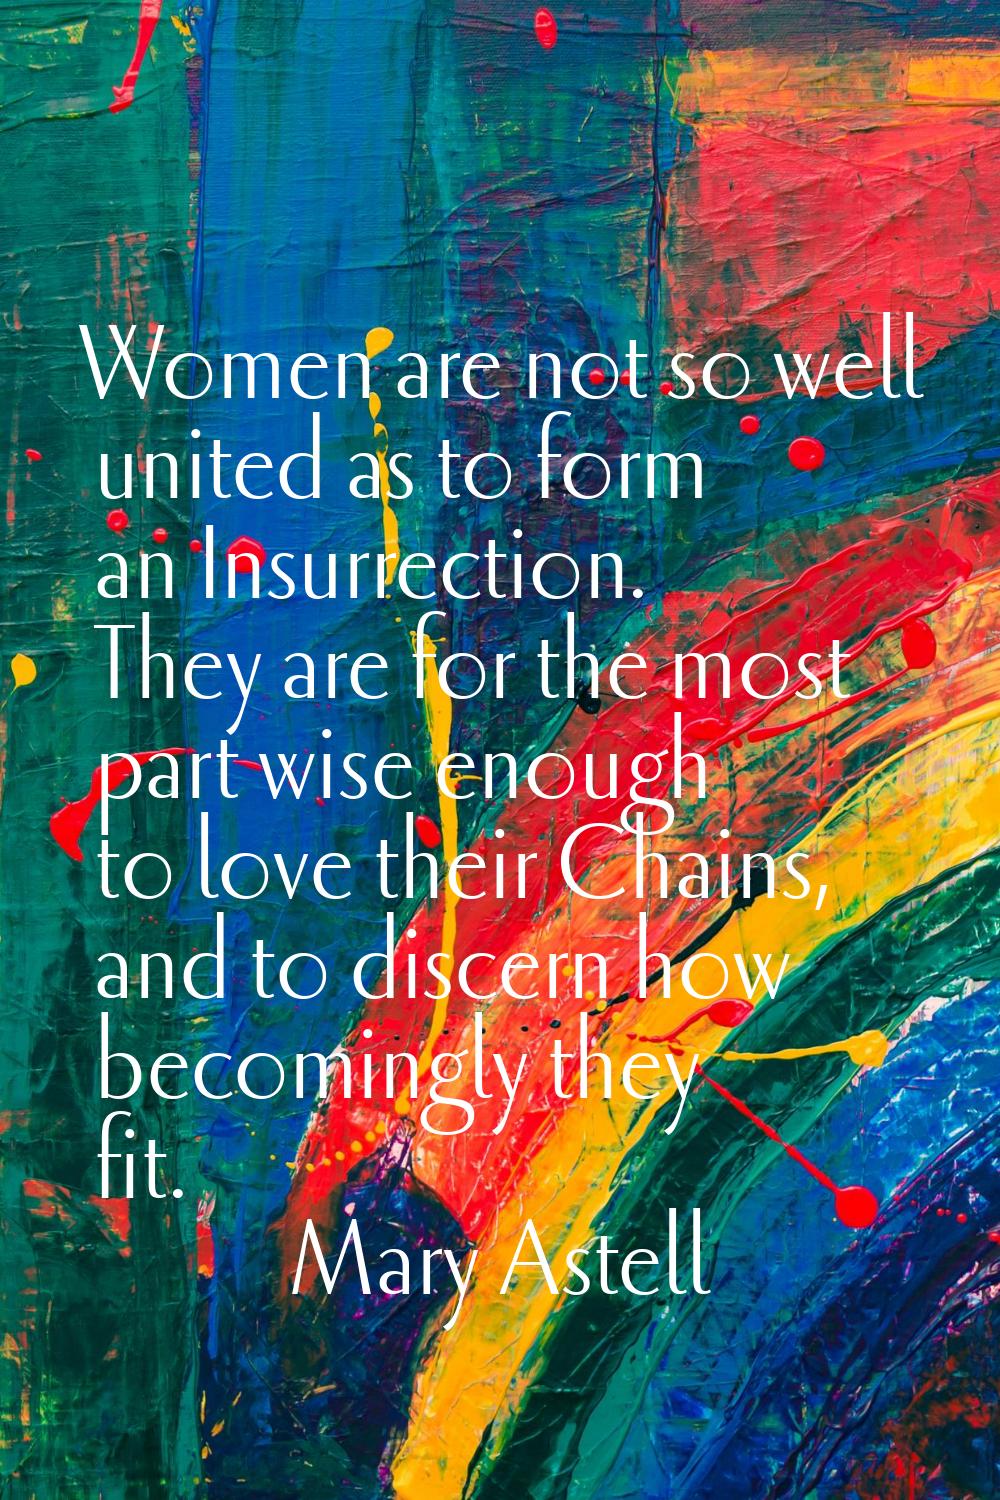 Women are not so well united as to form an Insurrection. They are for the most part wise enough to 